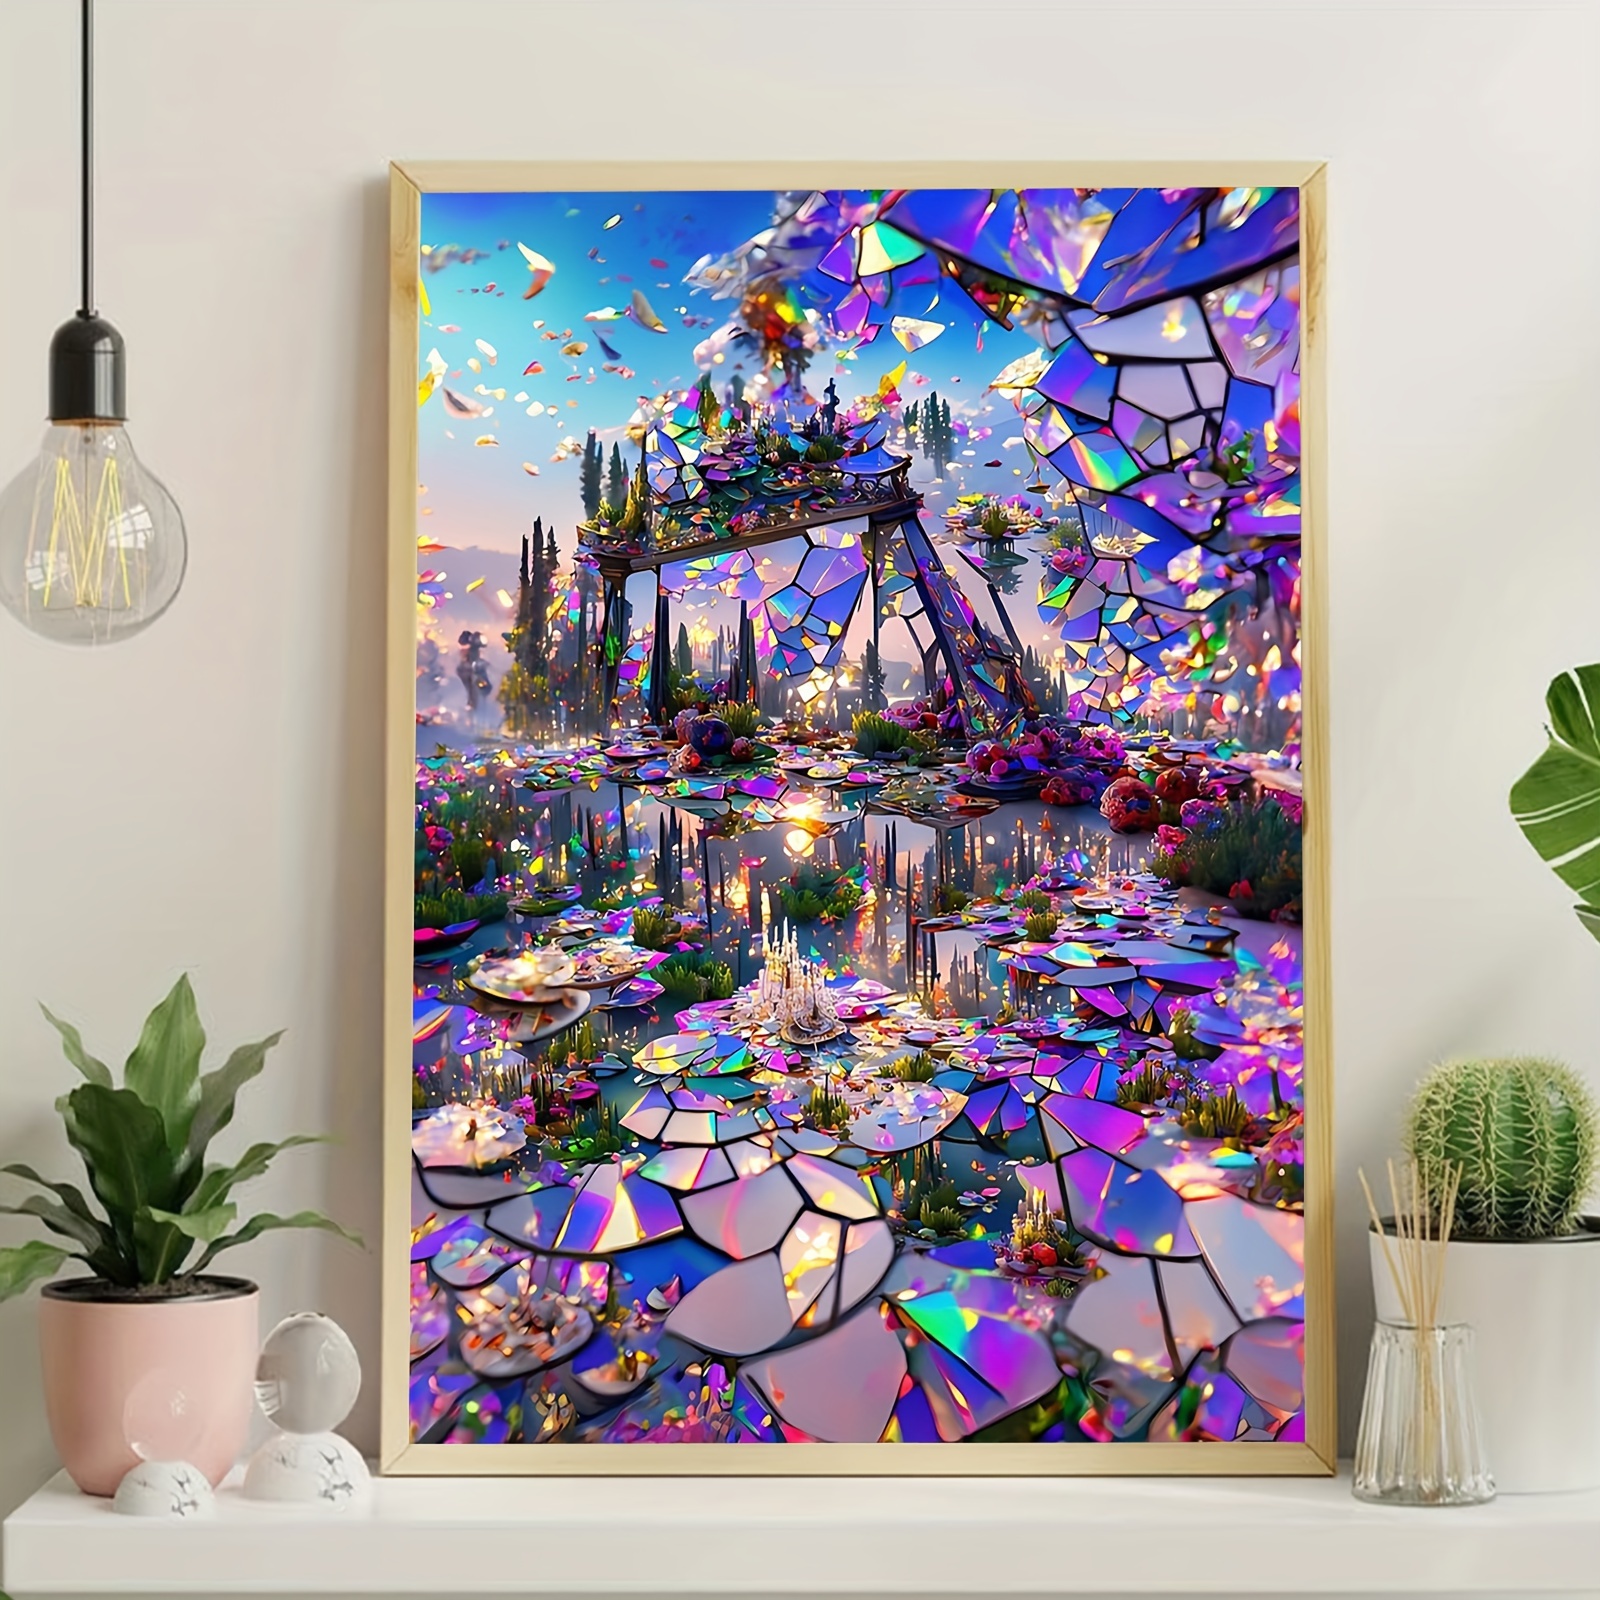 5d Diamond Painting Kits For Adults - Paint With Diamonds Full Round Drill  5d Diamond Dots Craft Diamond Art Kits - For Home Wall Decor And Adults Ki